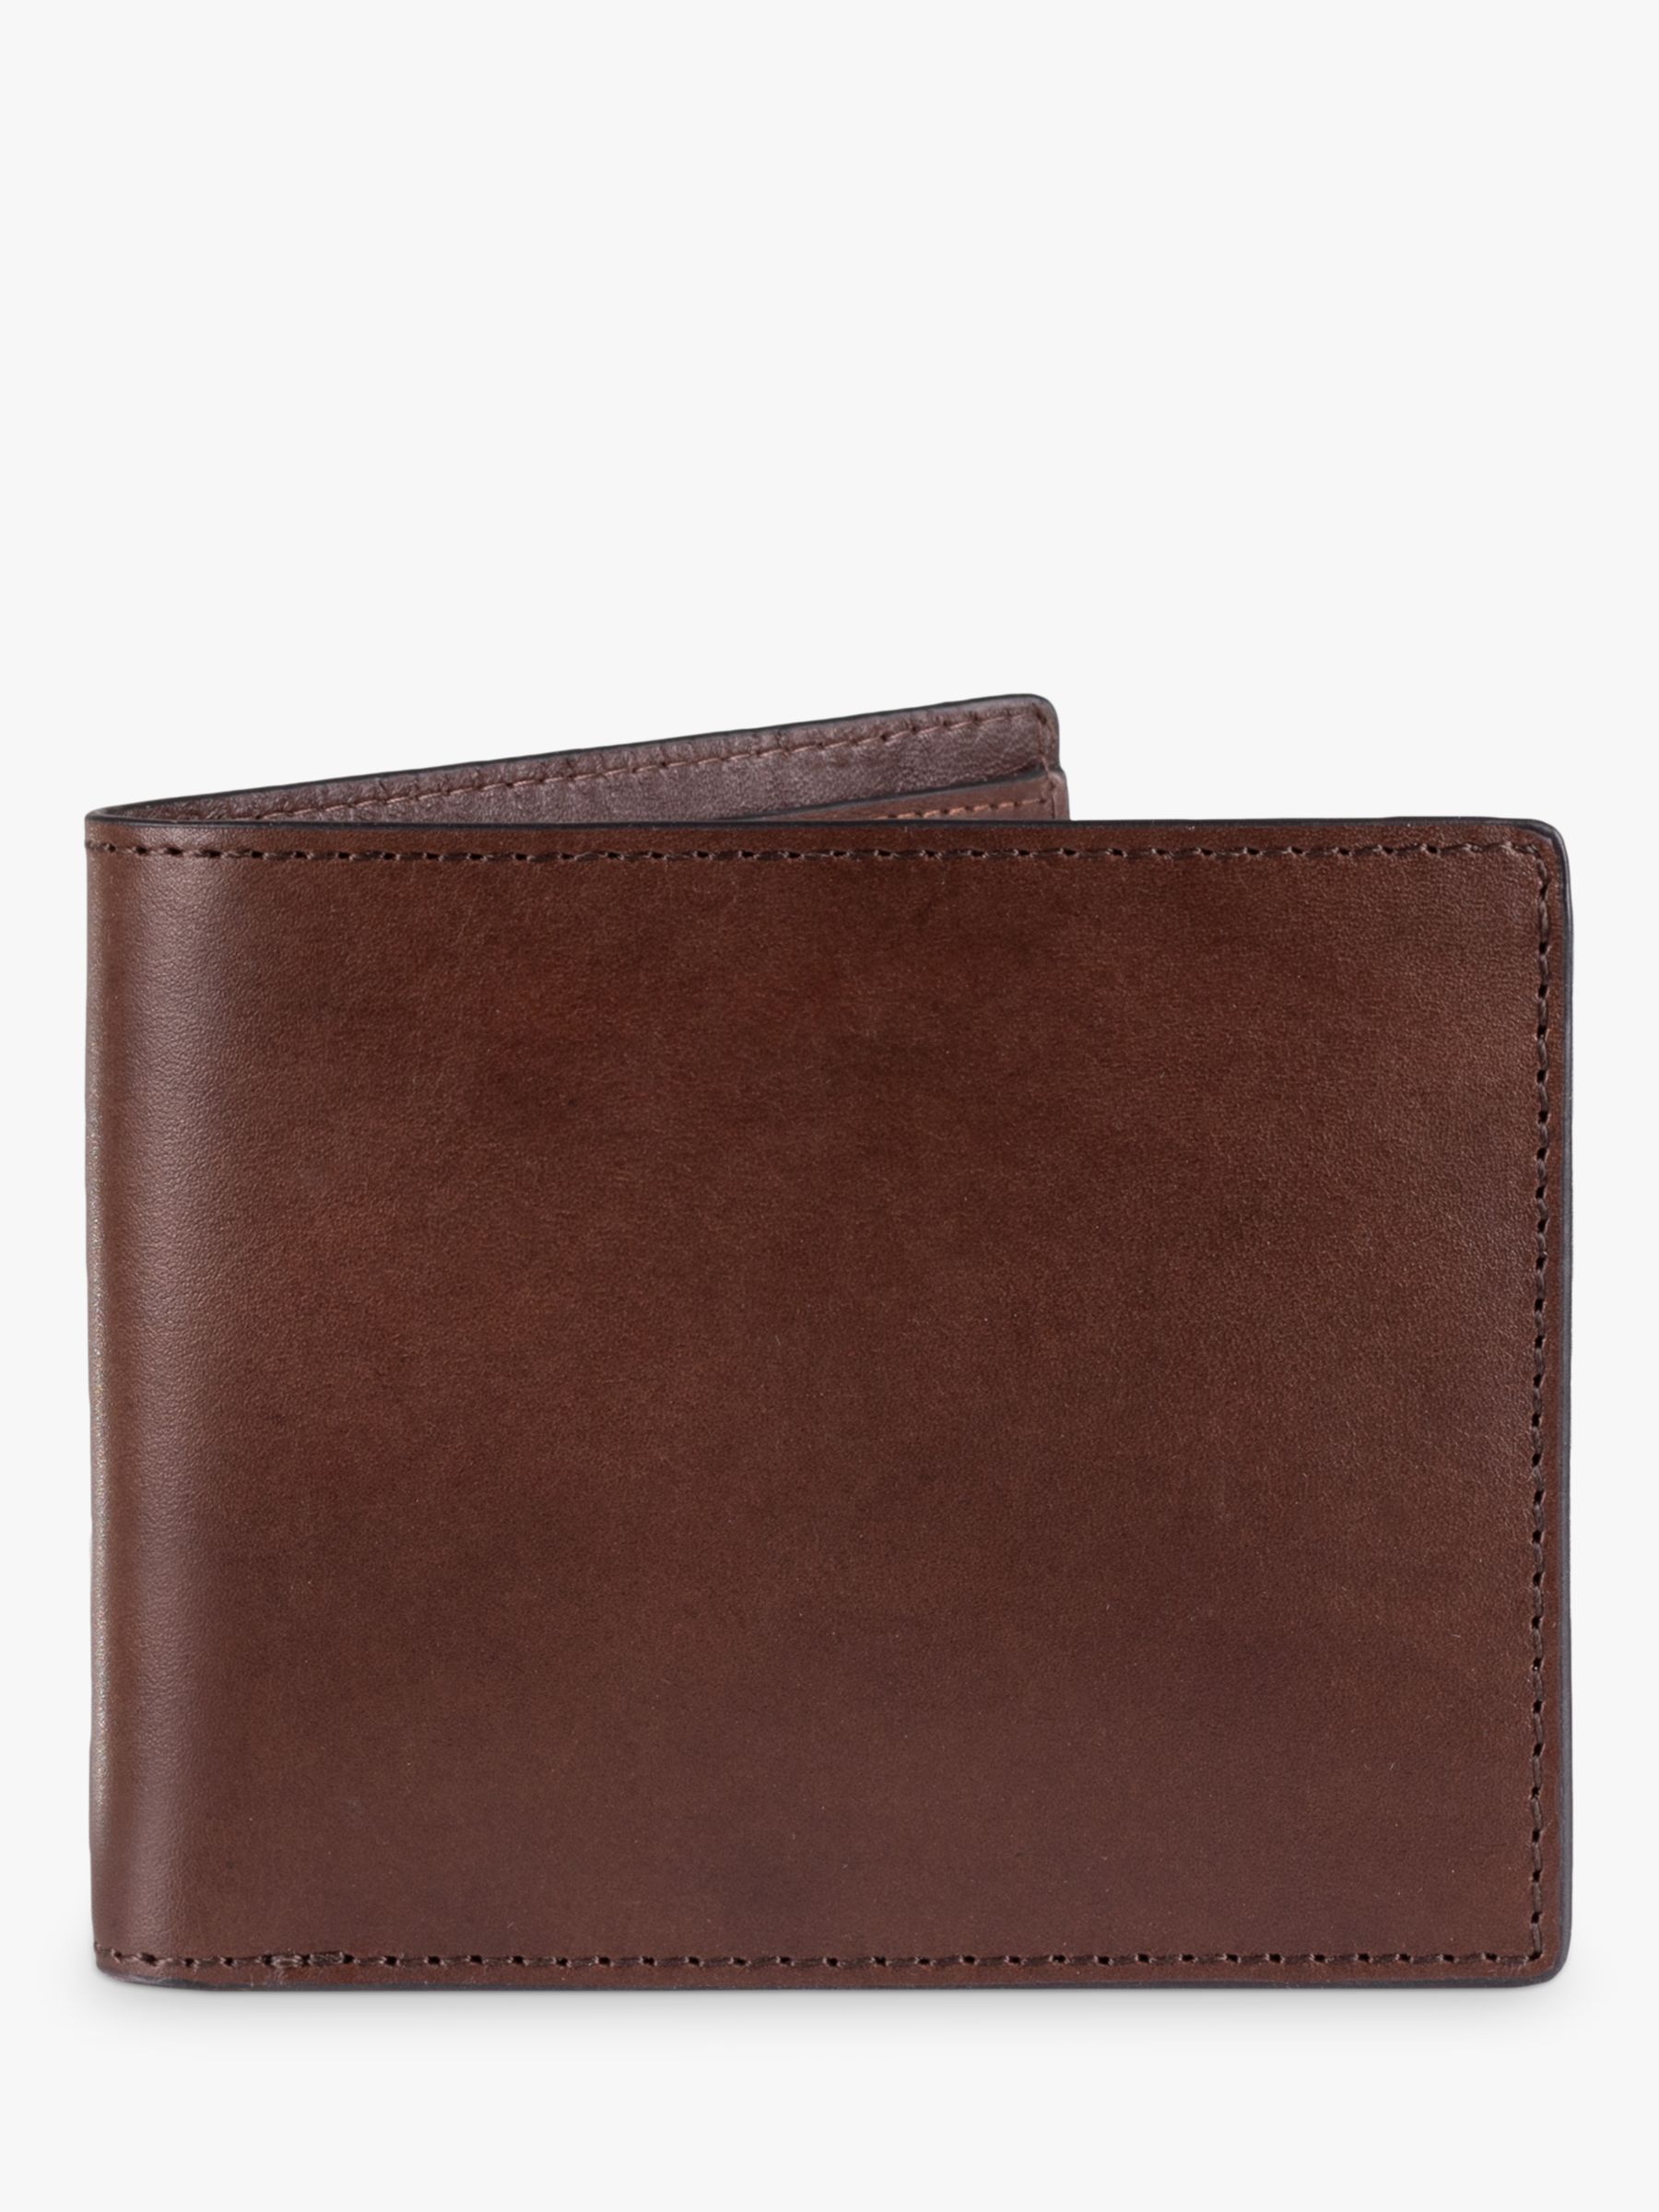 John Lewis Vegetable Tanned Leather Bifold Wallet